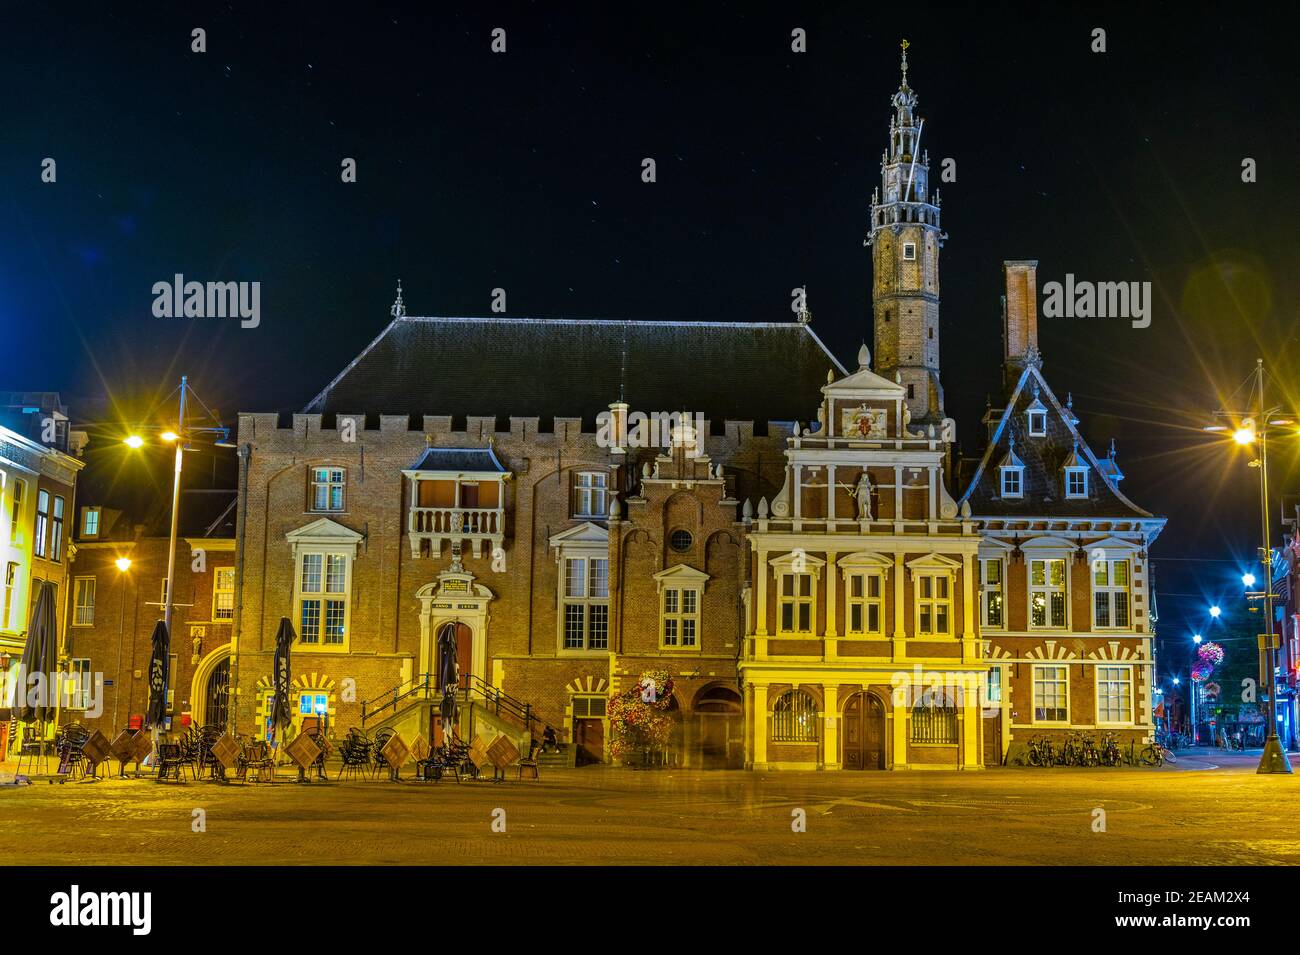 Night view of the town hall in the center of Haarlem, Netherlands Stock Photo